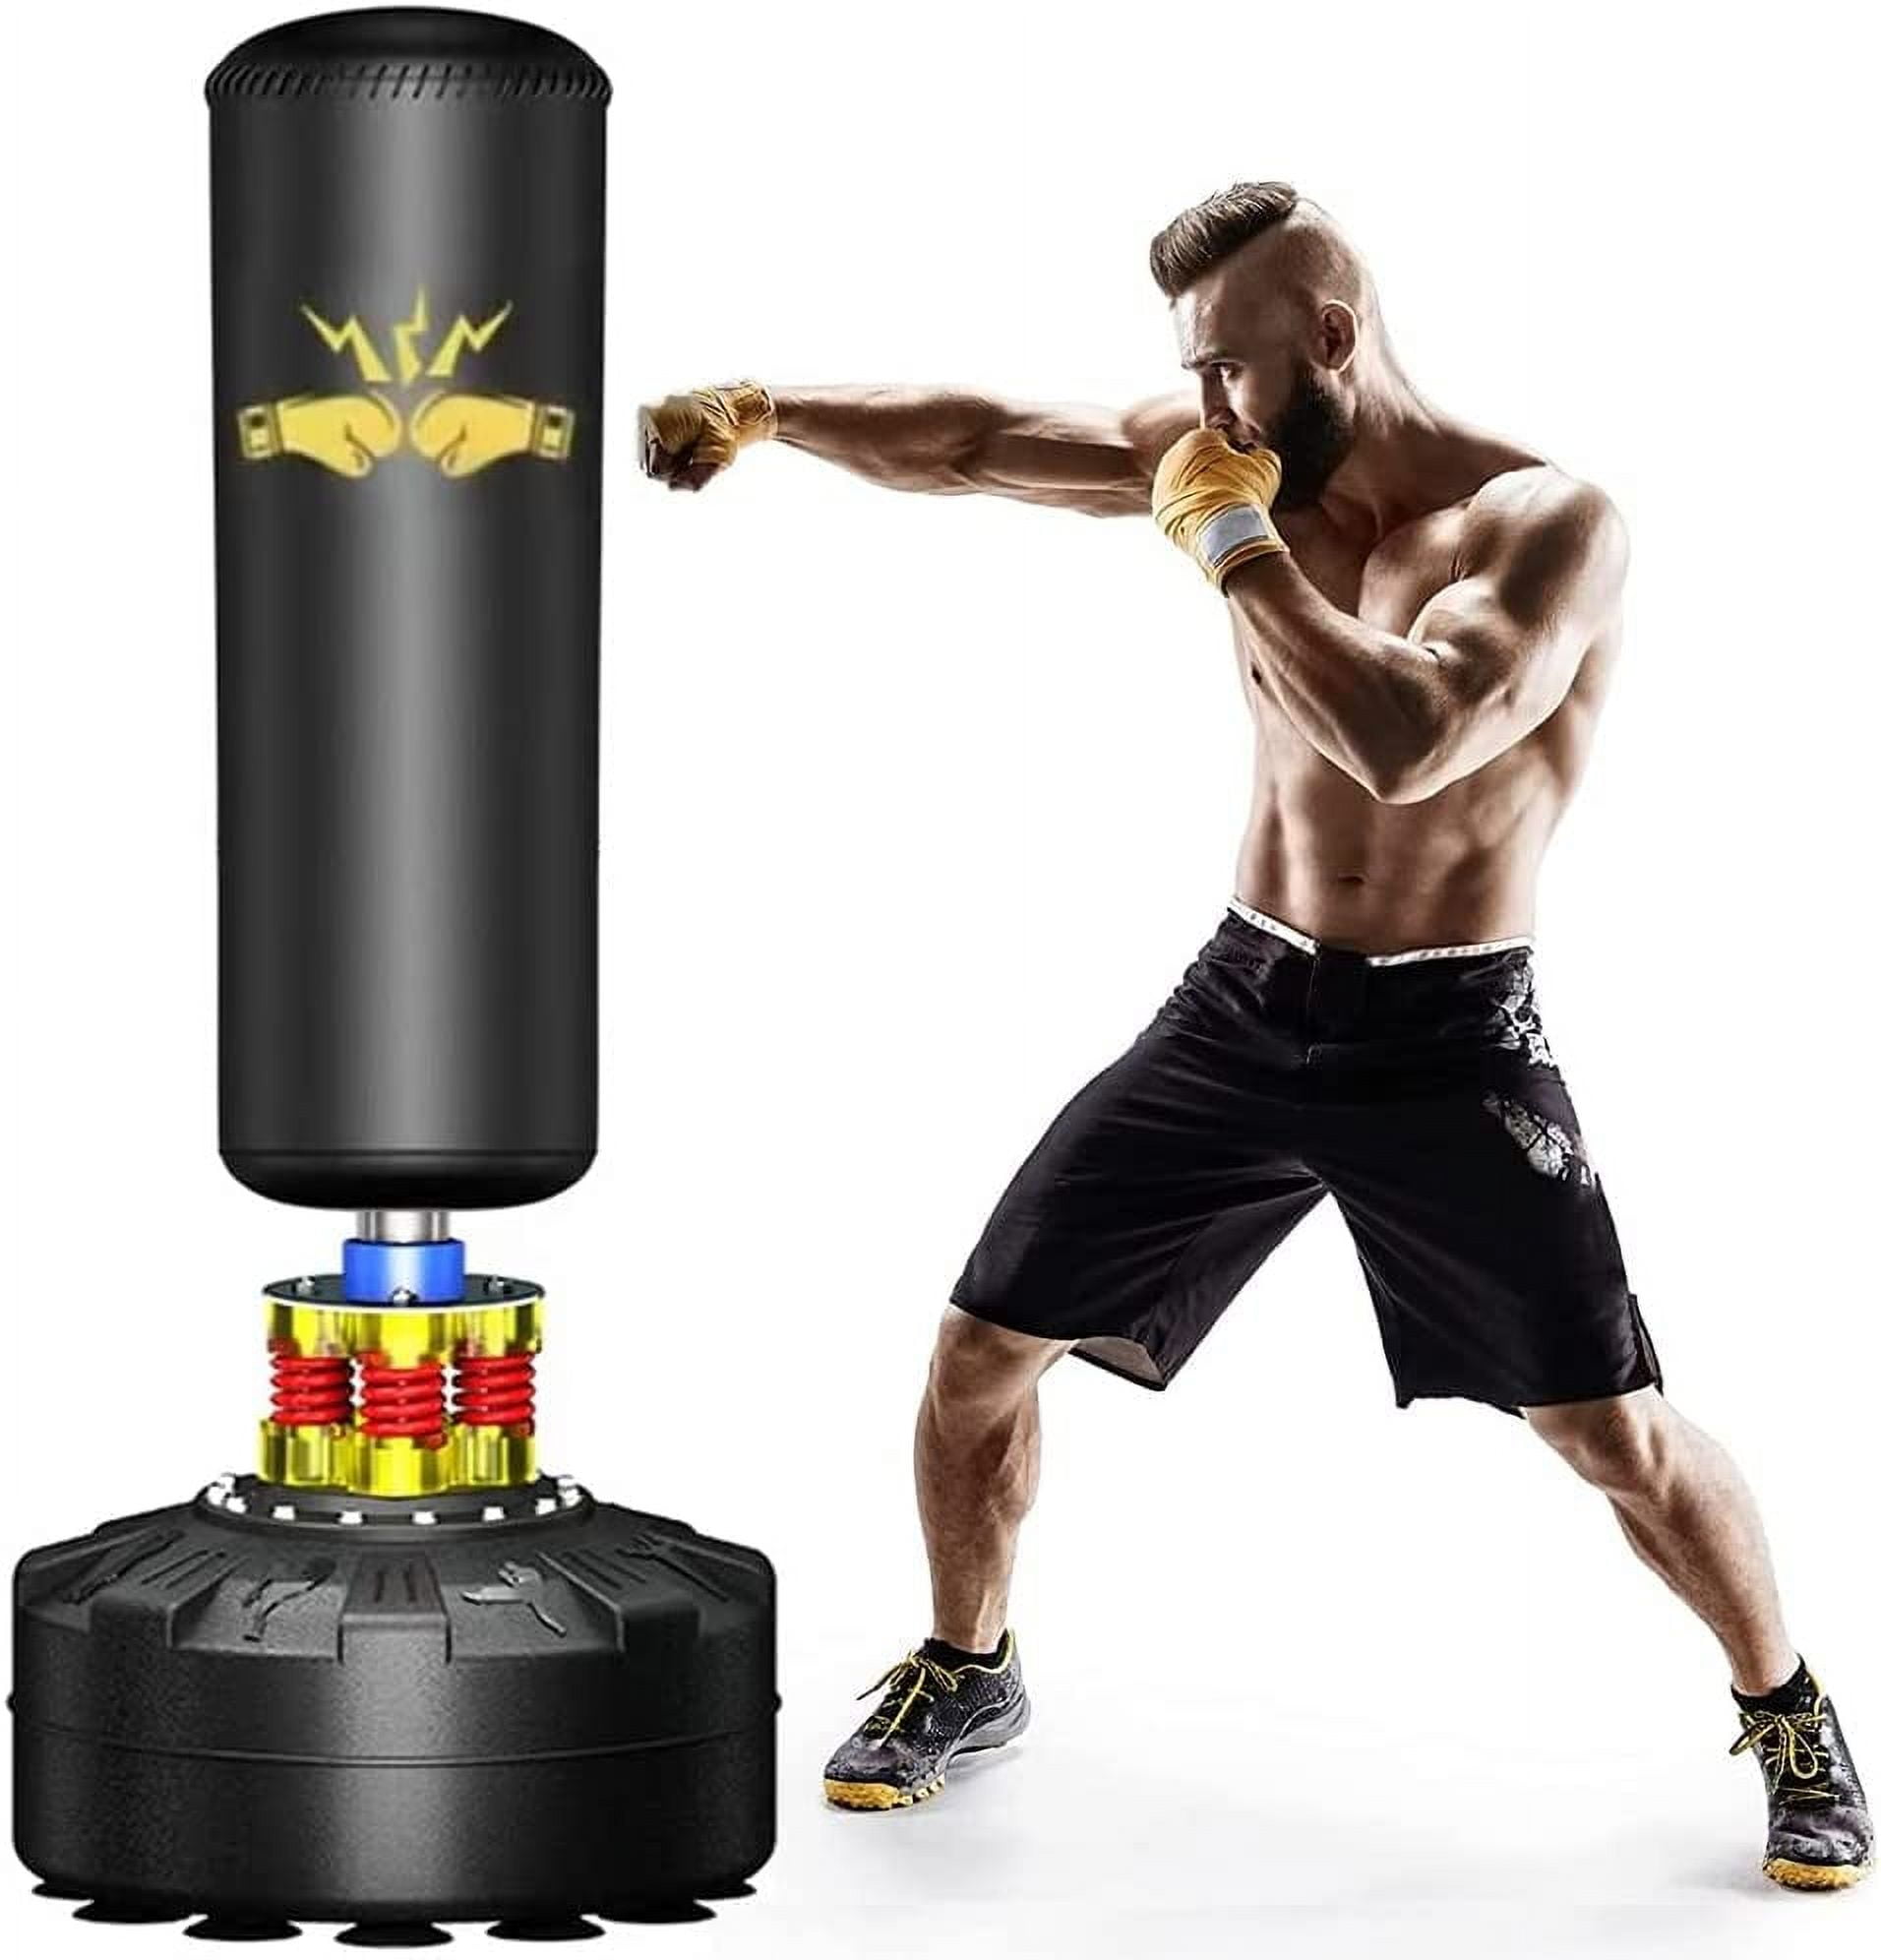 Toco FREIDO Heavy Punching Bag Unfilled Set for Adults Kids, Kick Boxing Set with Ceiling Hook Steel Chain, Hanging Heavy Bag for Adults Men Women